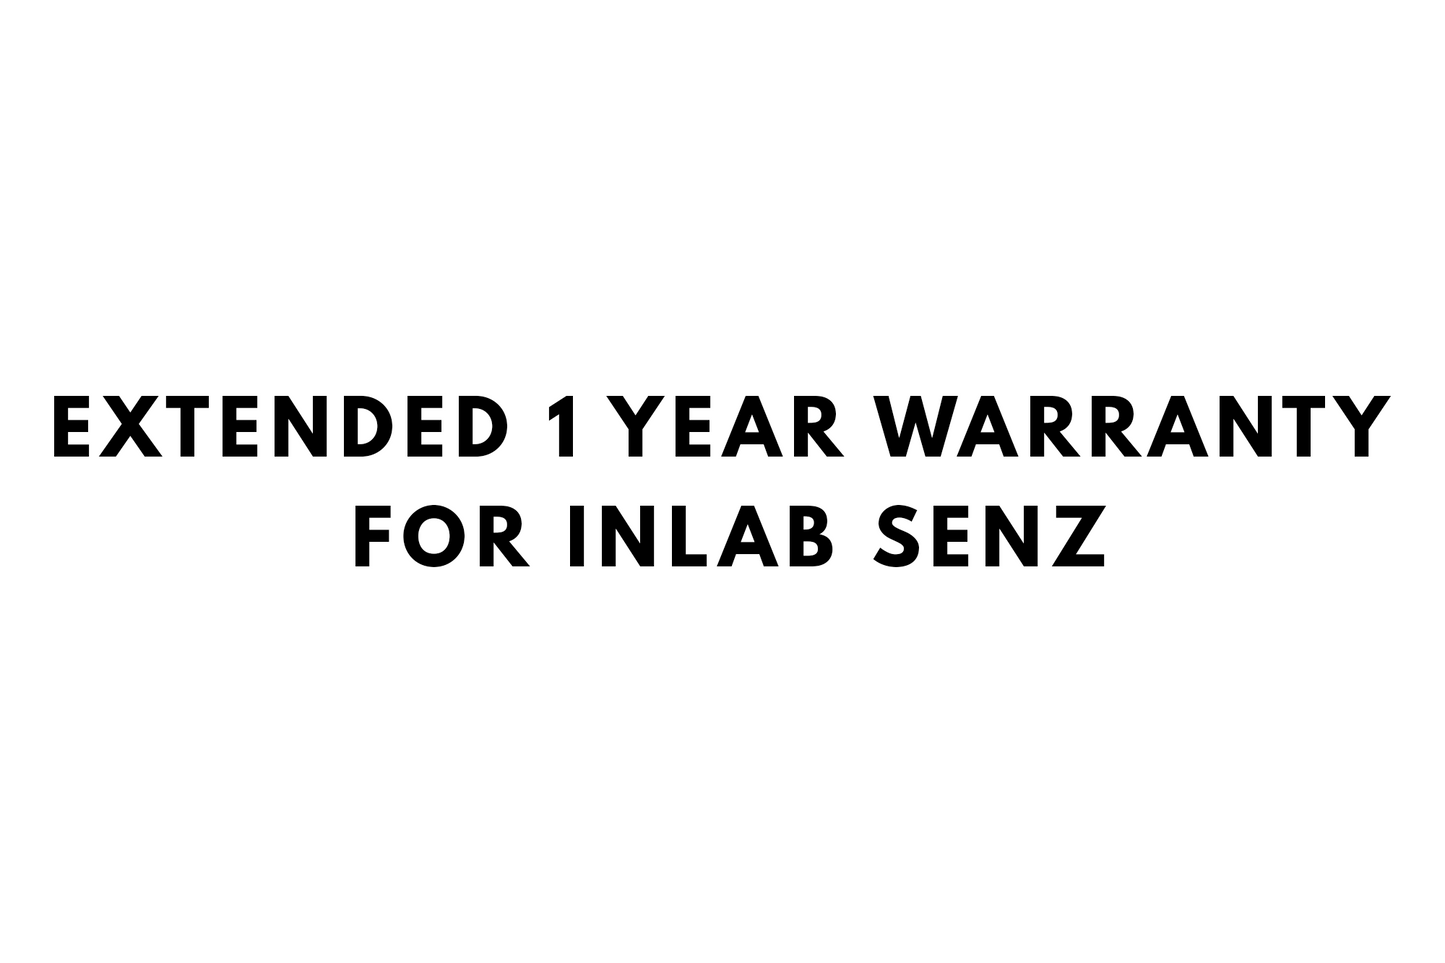 Extended 1 Year Warranty for INLAB SENZ